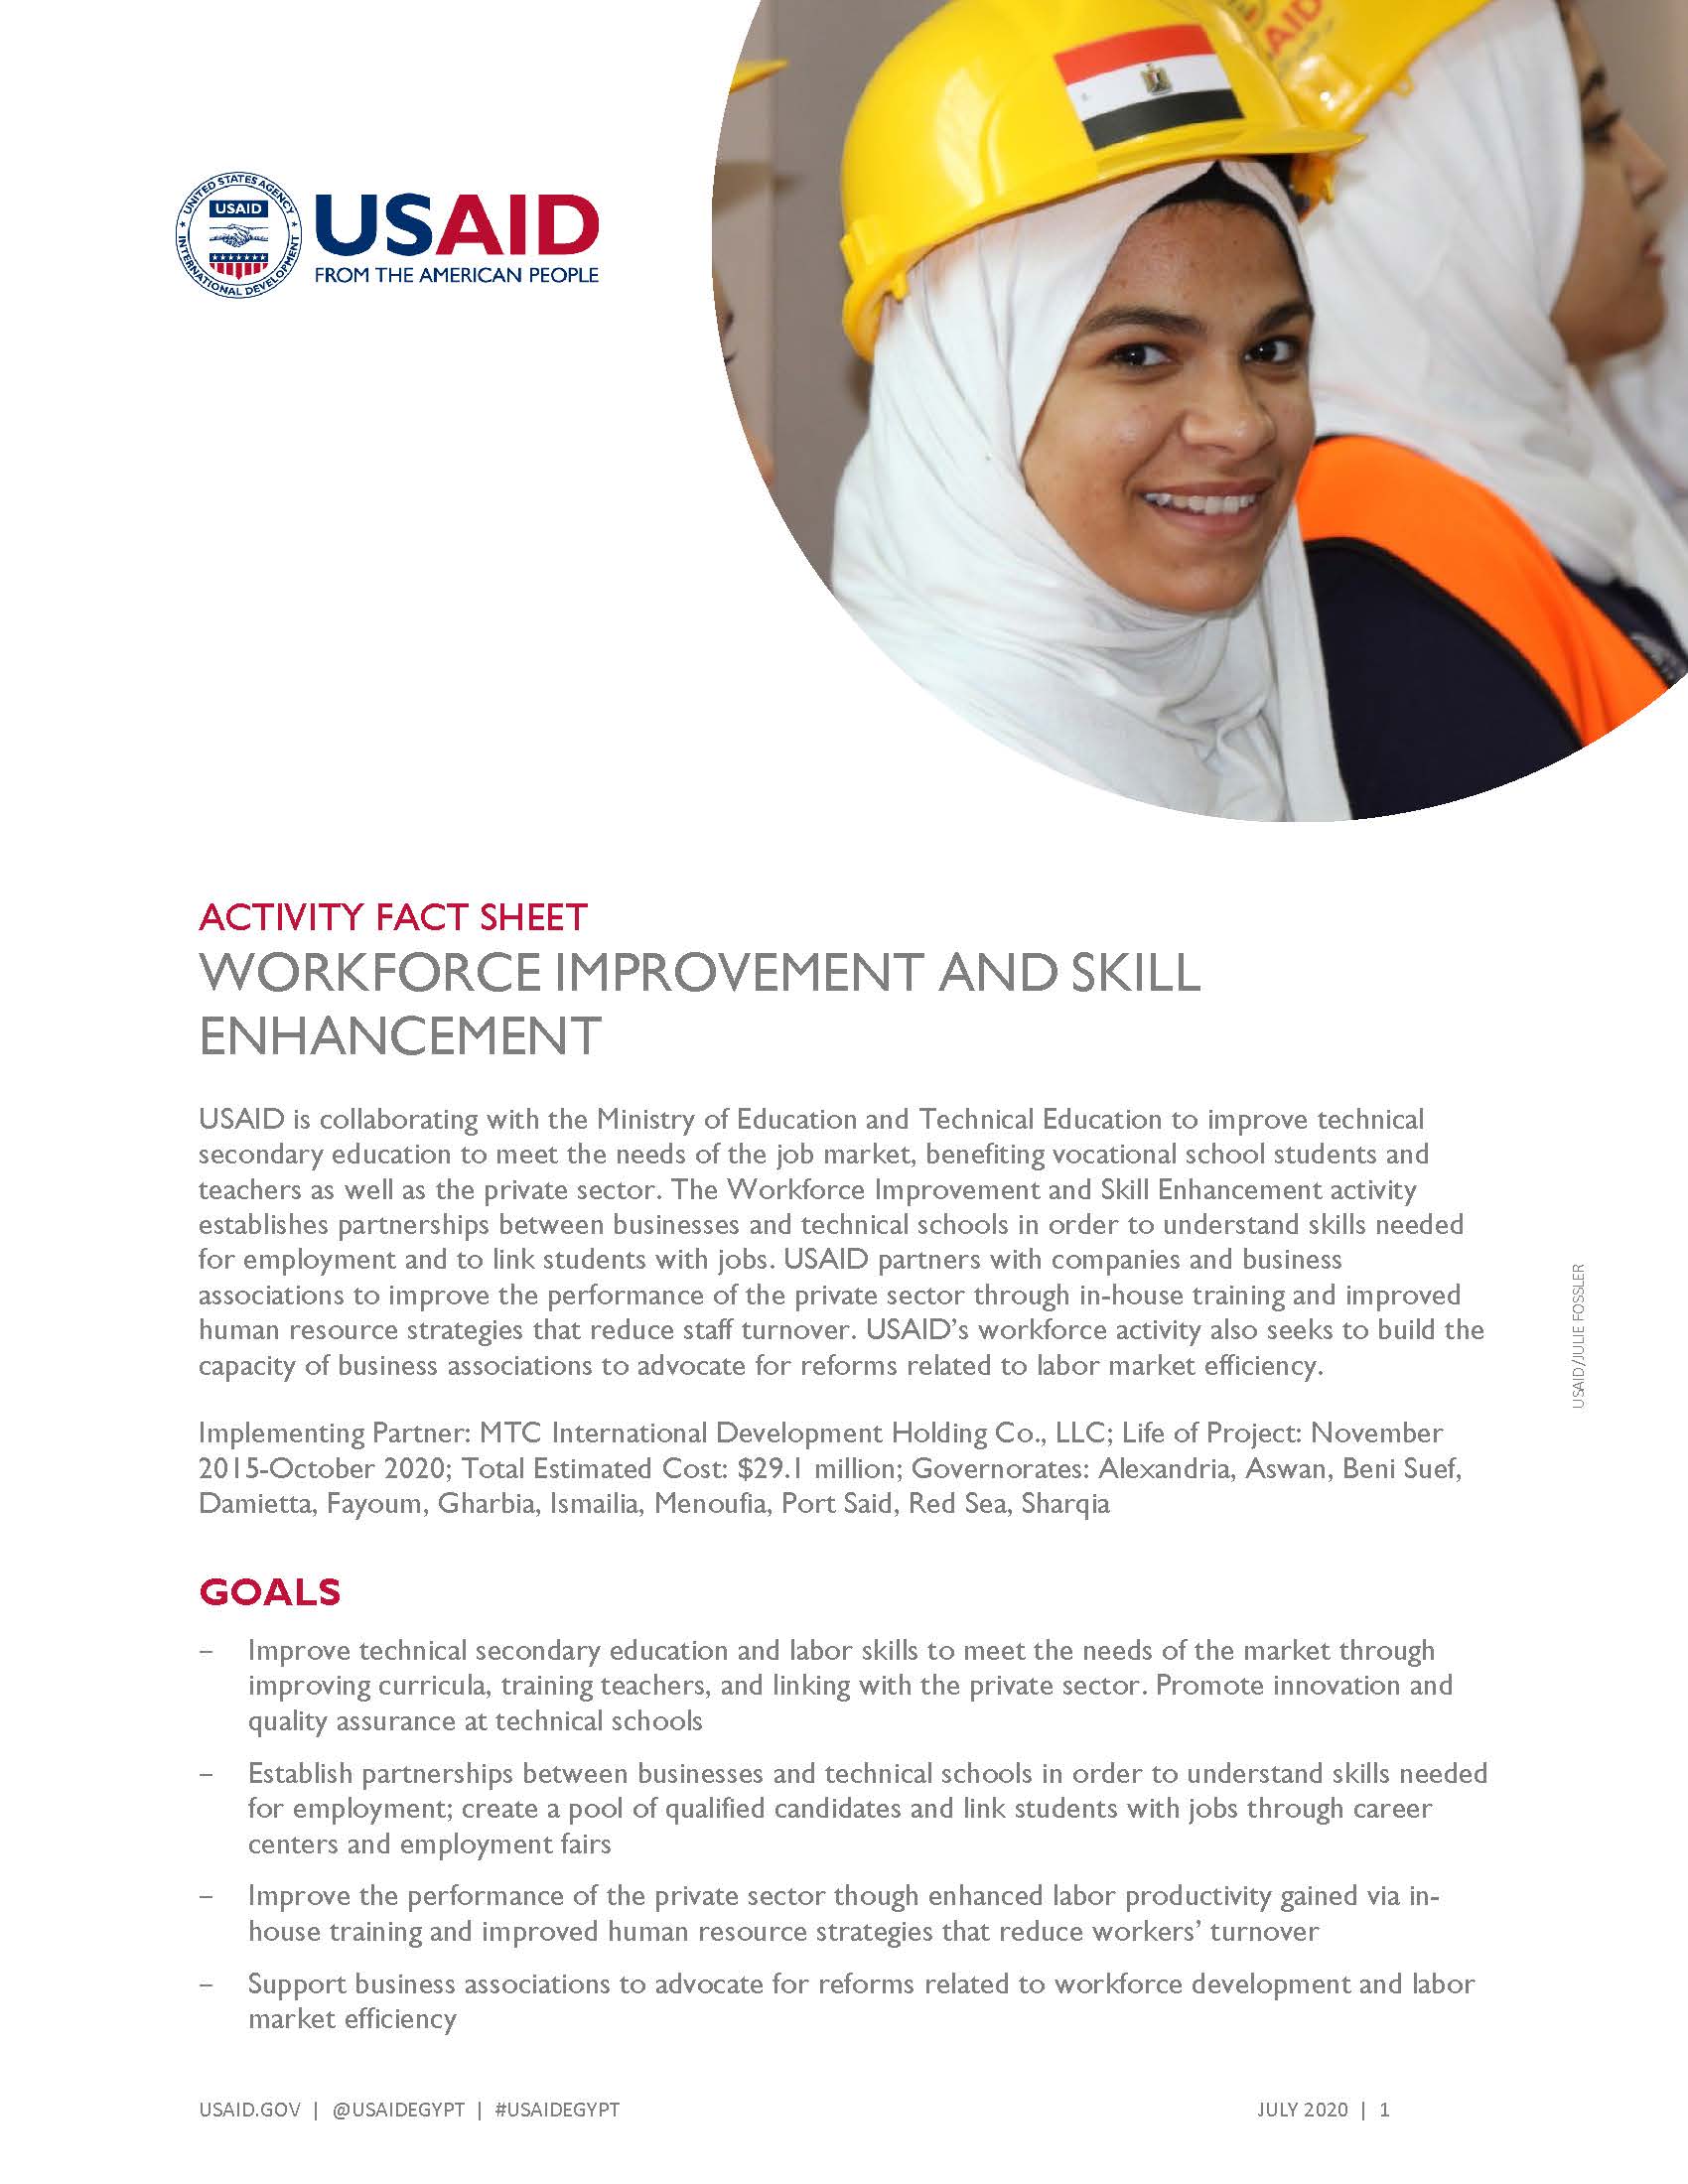 USAID/Egypt Activity: Workforce Improvement and Skill Enhancement